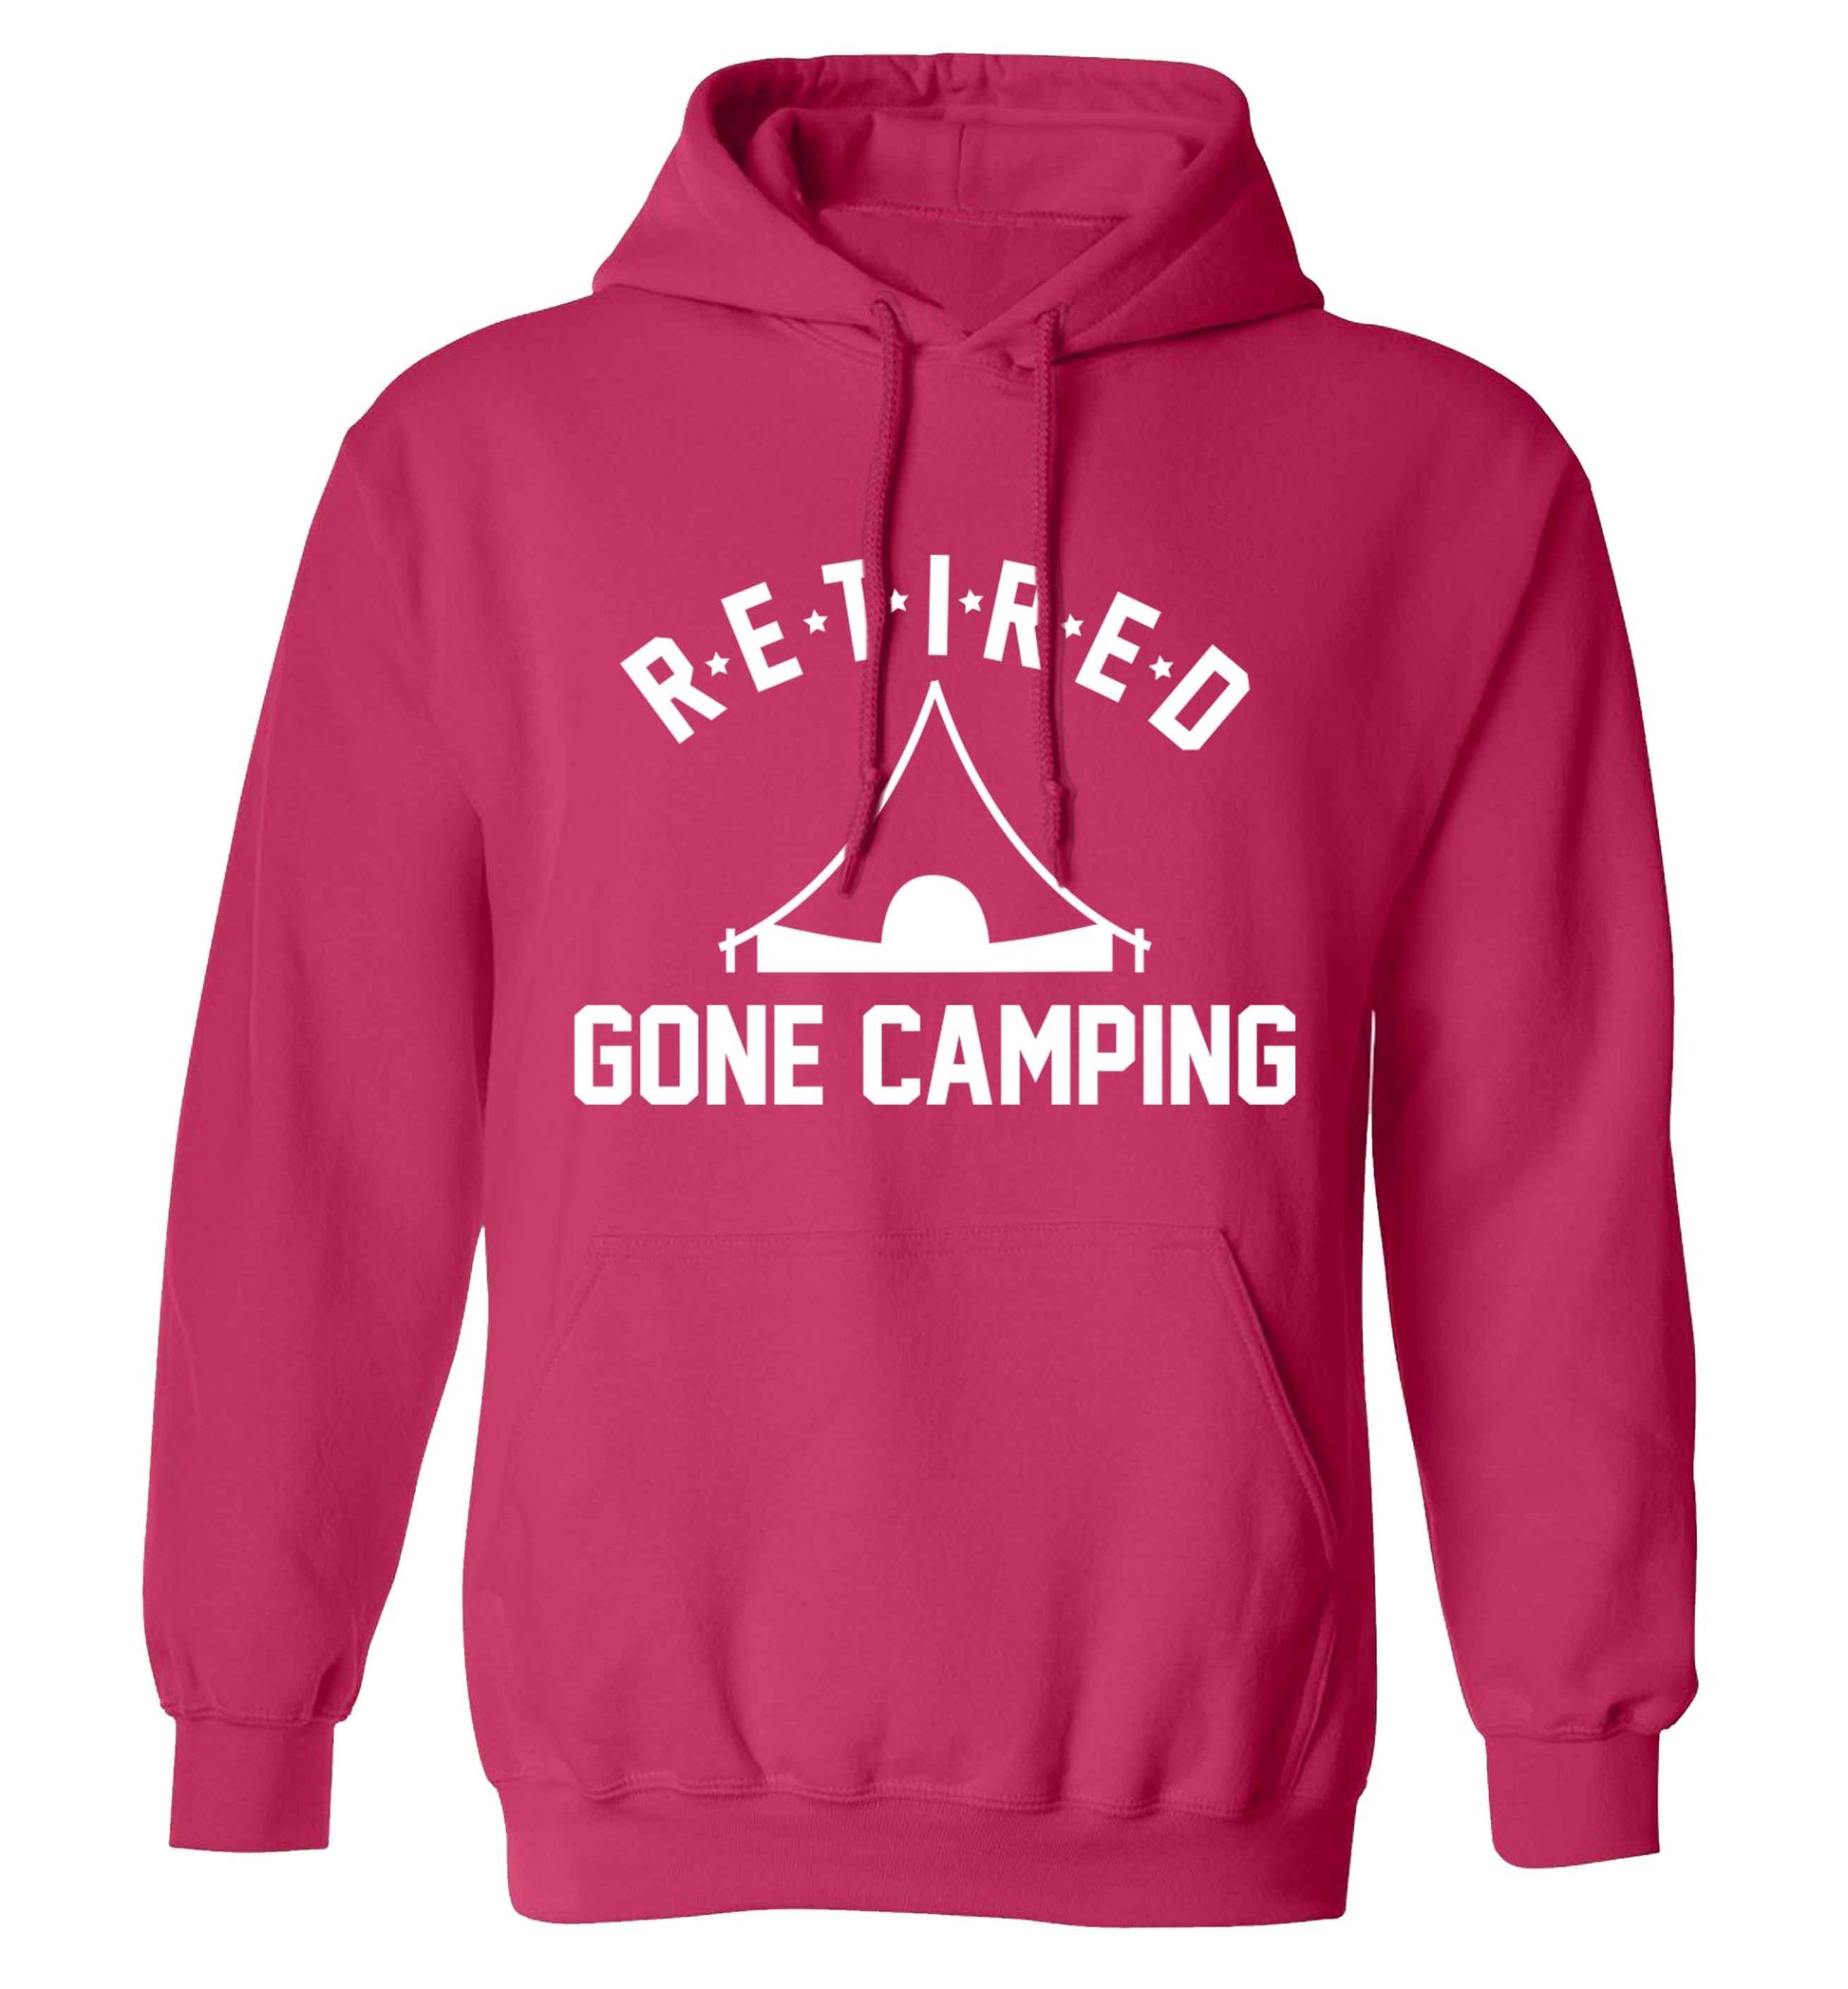 Retired gone camping adults unisex pink hoodie 2XL